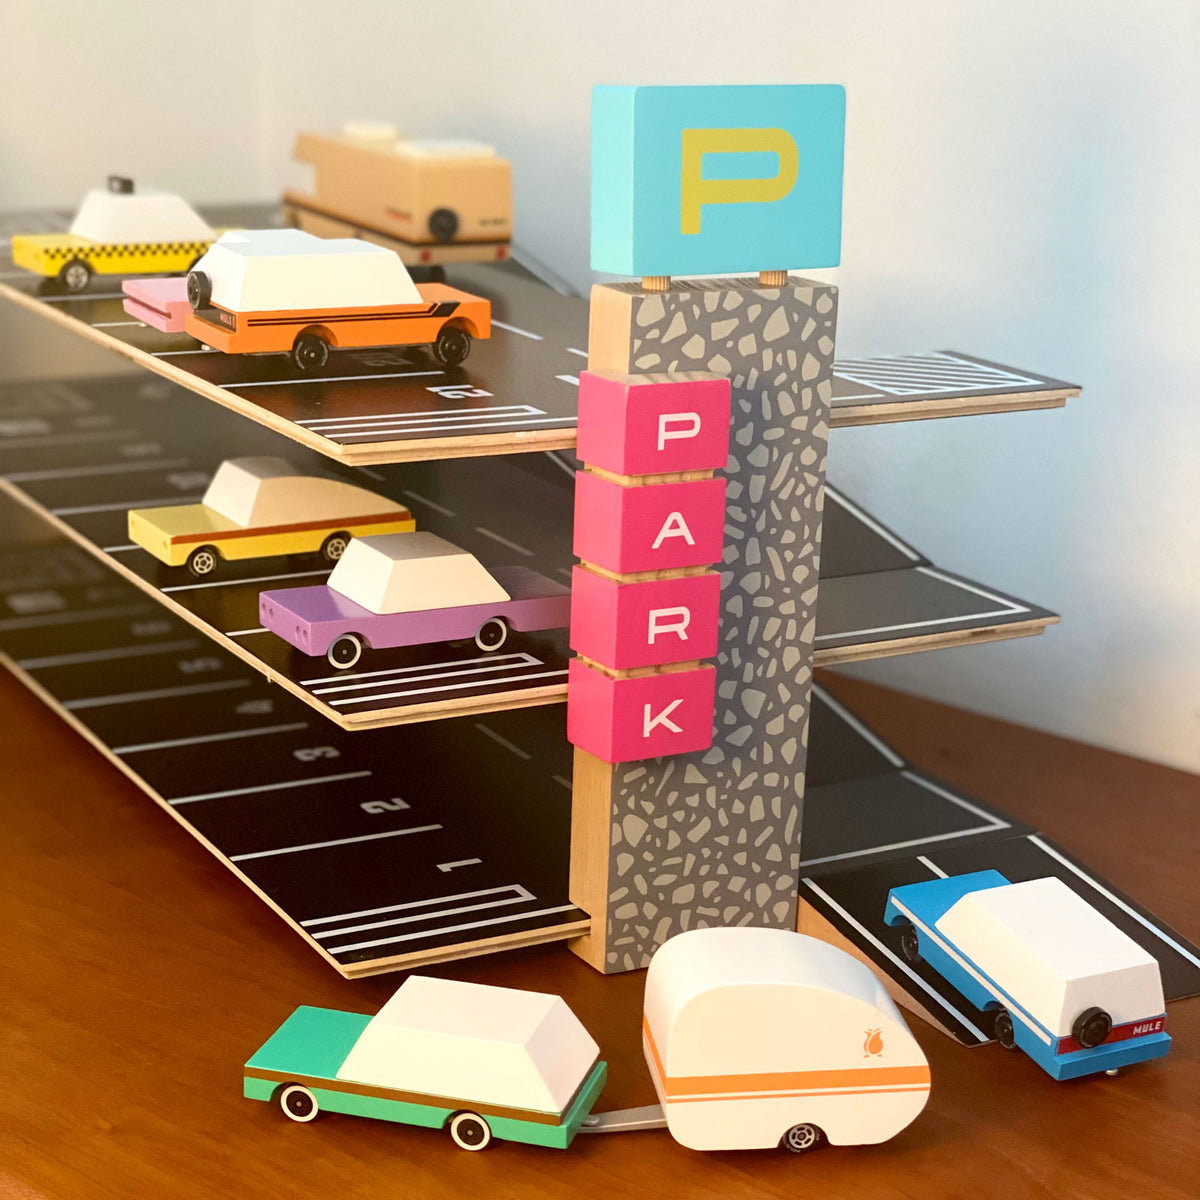 Magnetic Parking Garage by Candylab with an RV, taxi, camper, etc...